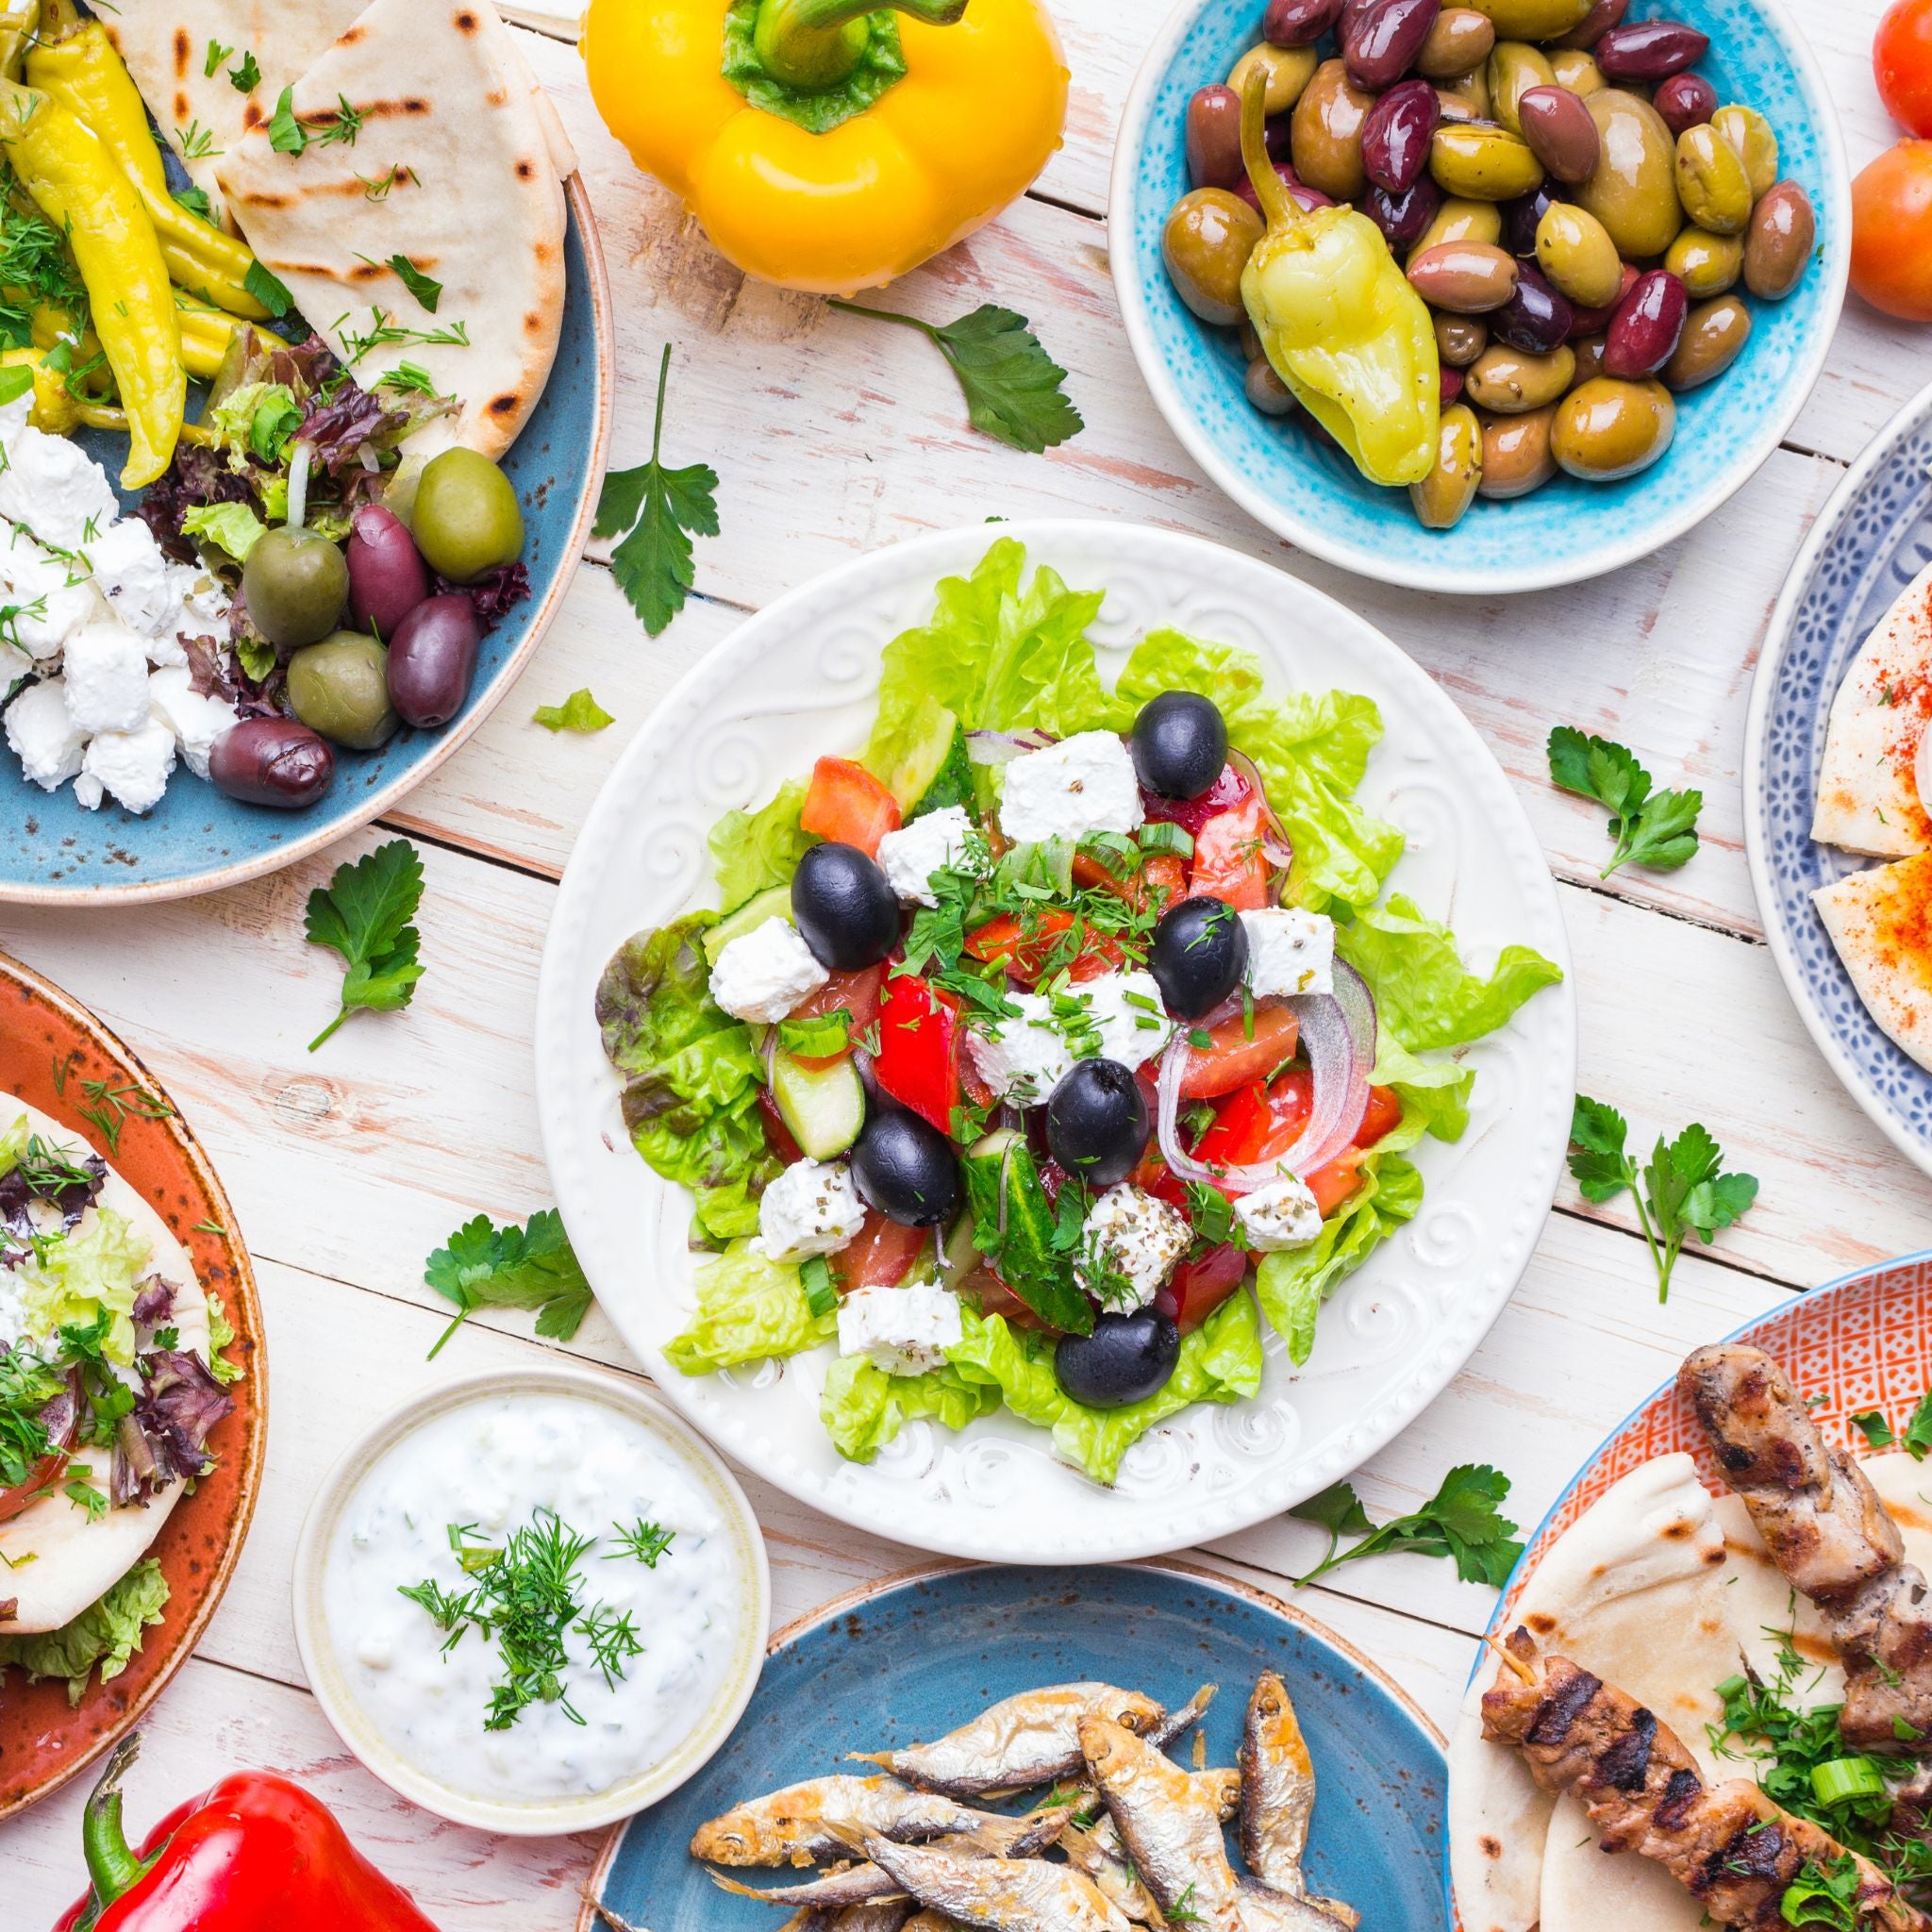 Mediterranean Diet and Healthy Food from Greece